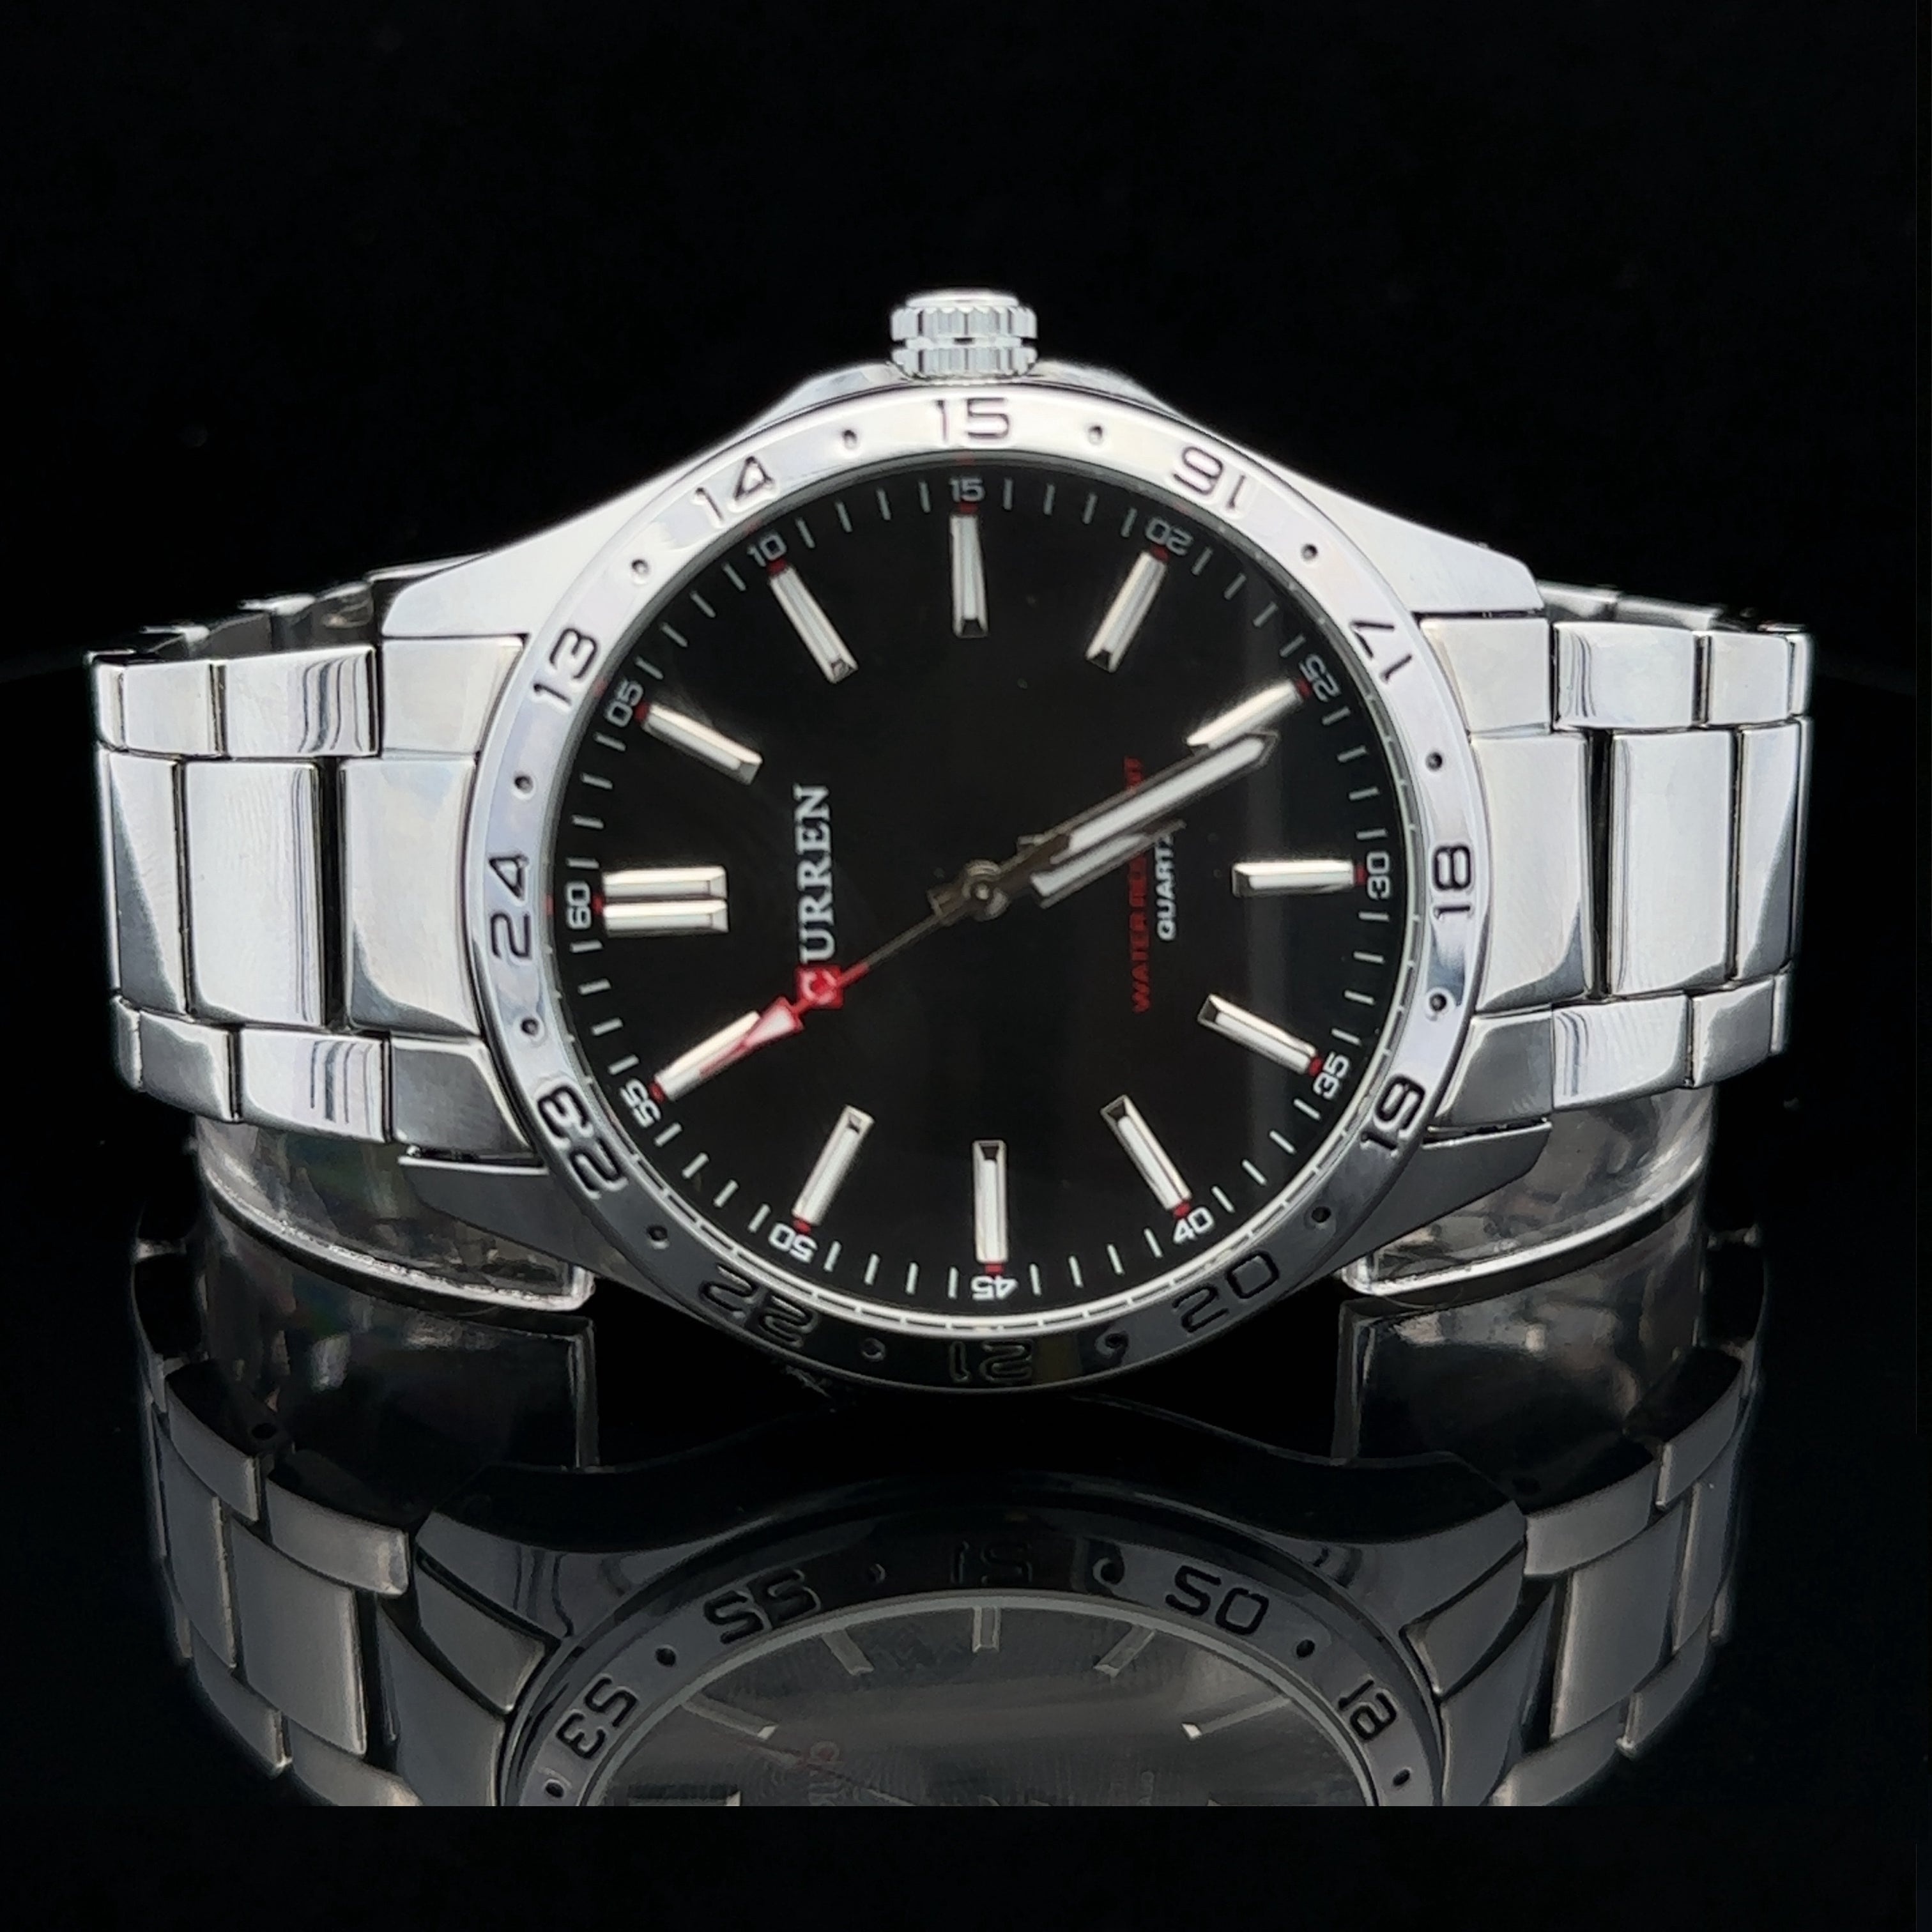 EVOCATIVE METAL BACK STAINLESS MENS WATCH I 551737